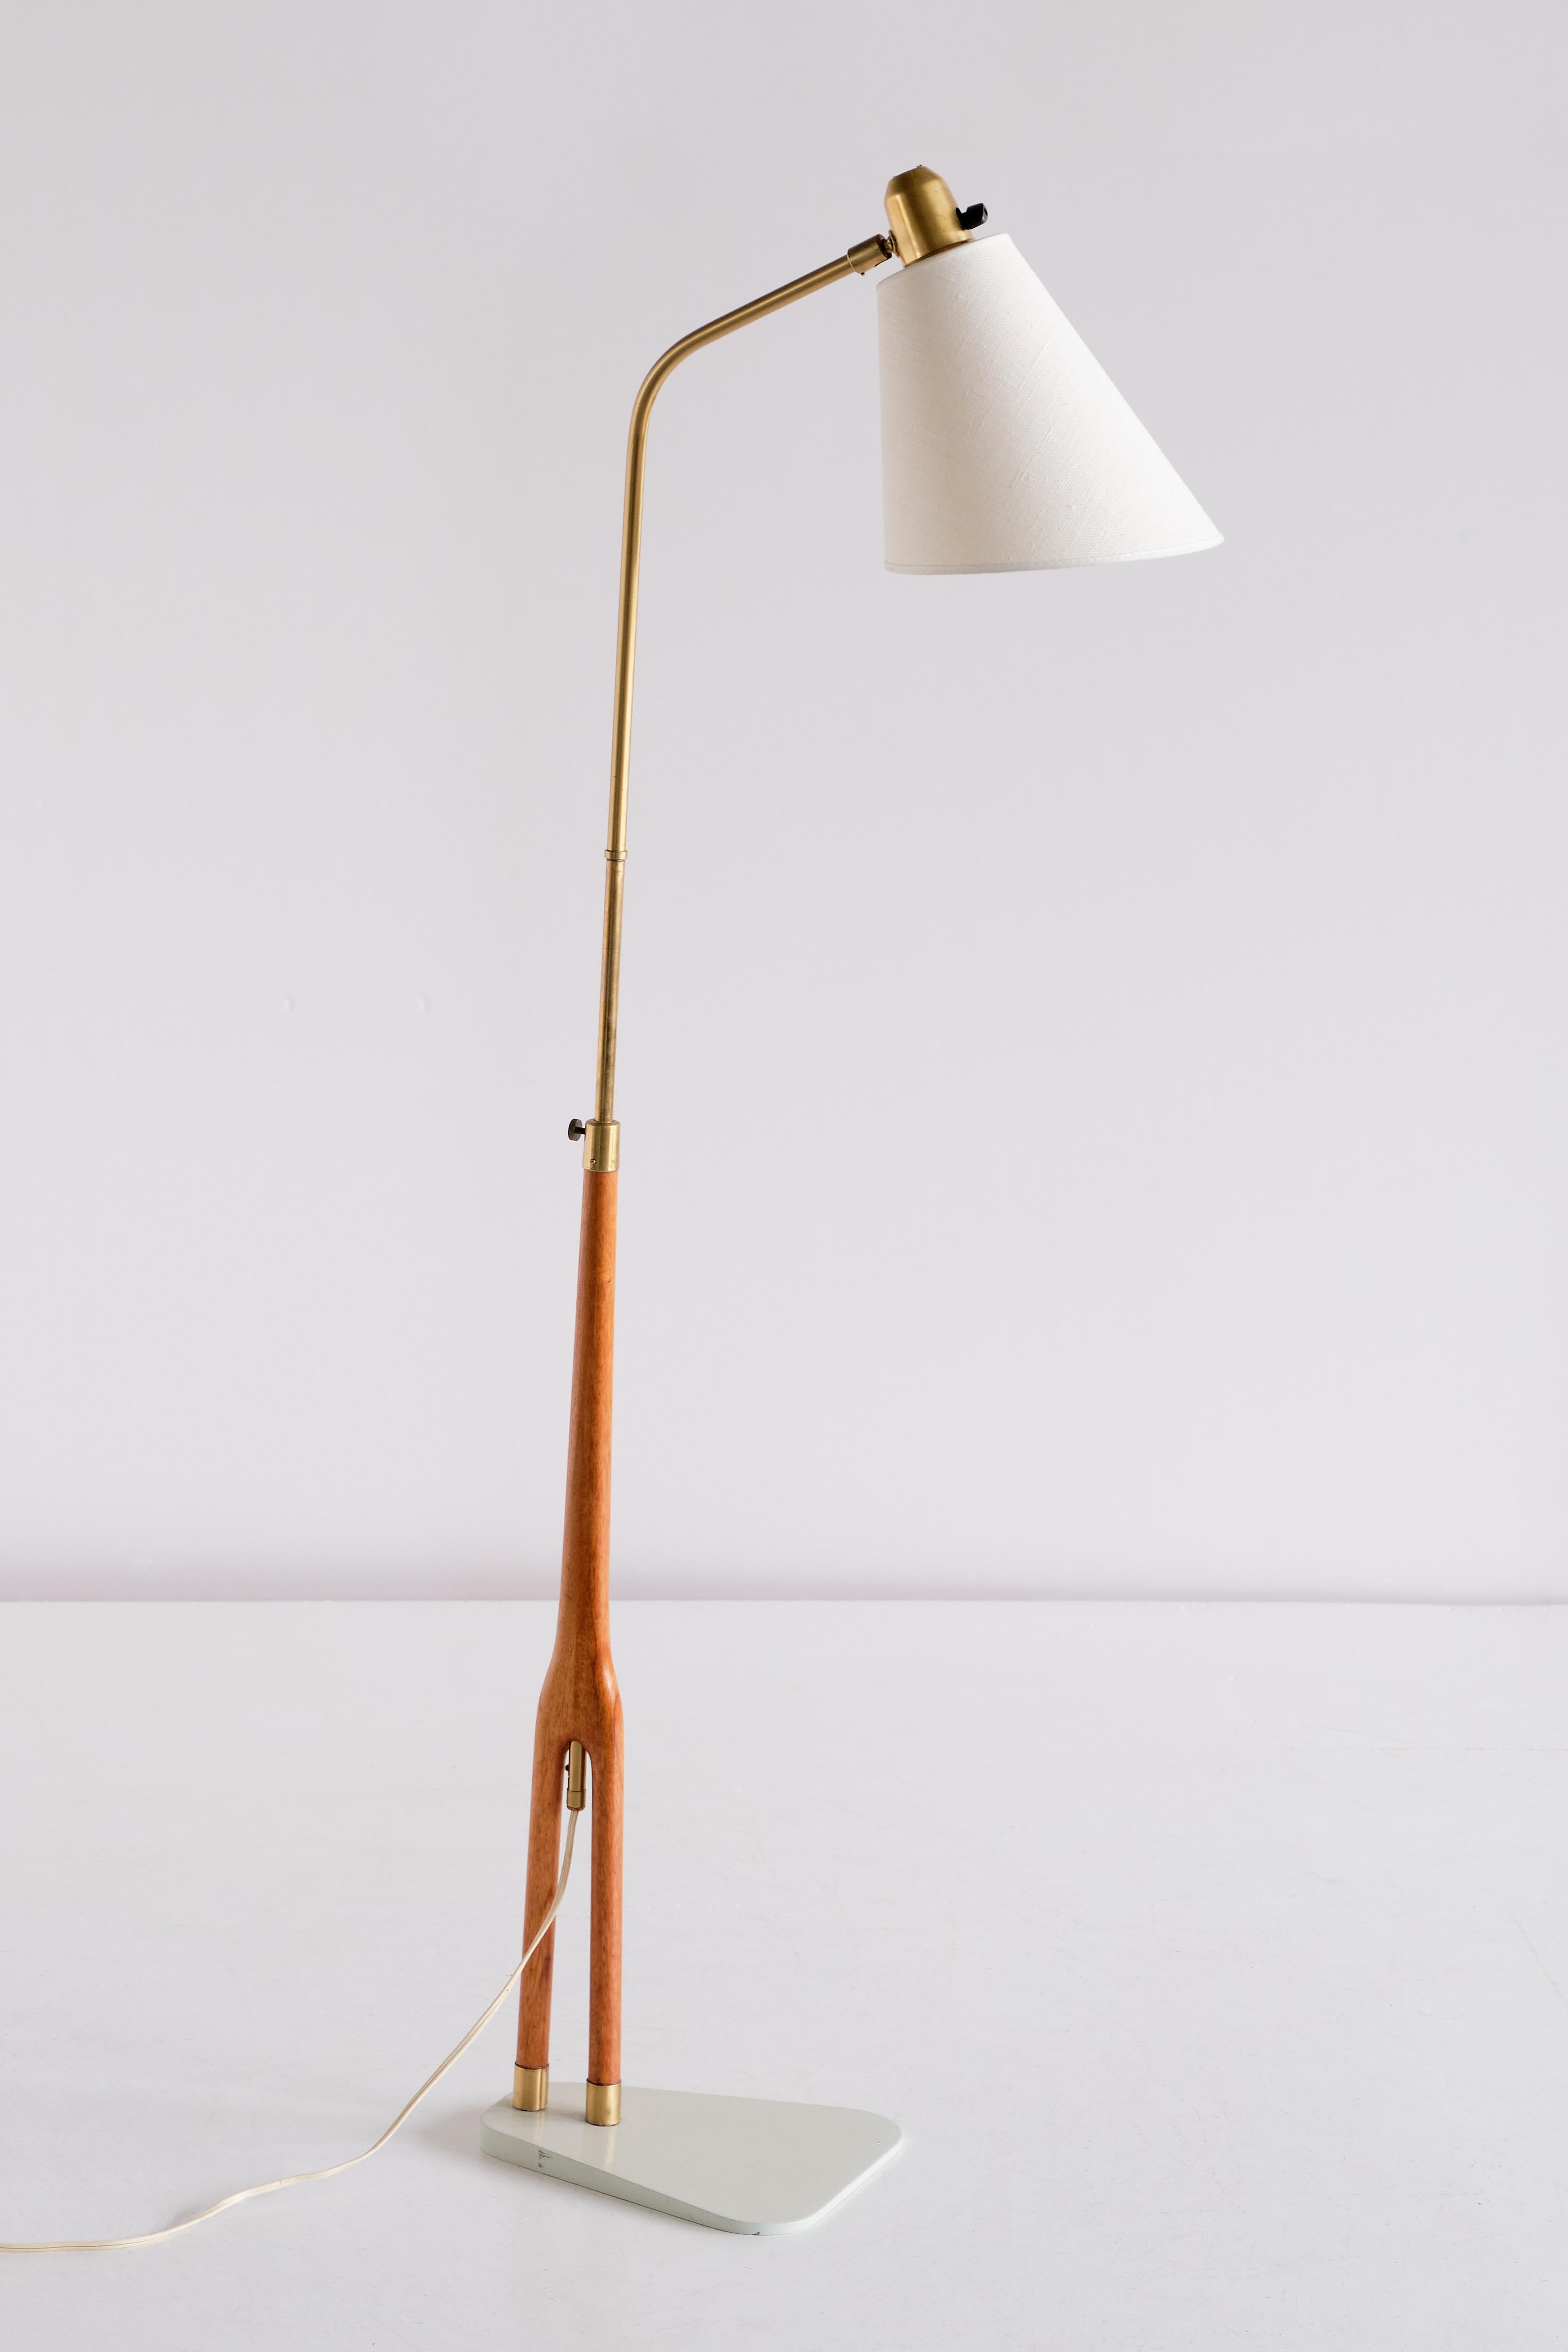 This striking floor lamp was designed by Hans Bergström and produced by ASEA in Sweden in the early 1950s. A very rare and elegant model by one of the masters of Swedish Modern lighting.

The two-legged teak and brass frame stands on metal base in